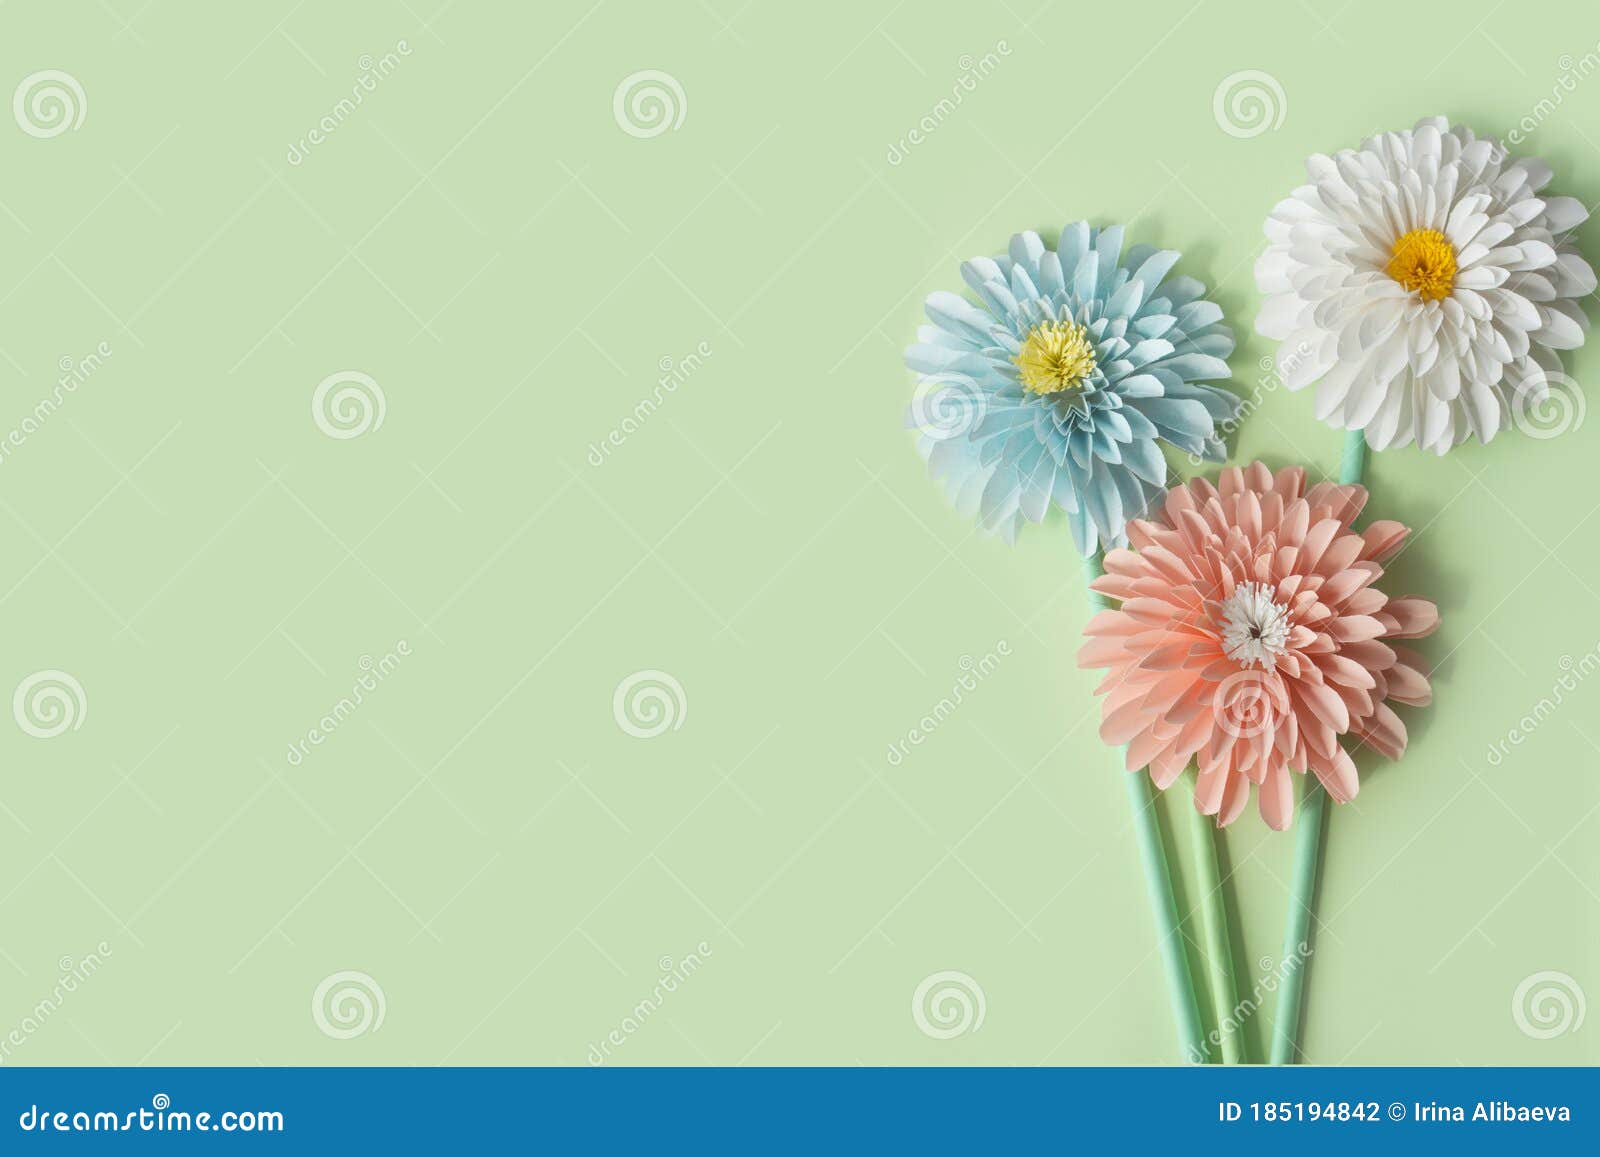 Blue, White and Pink Paper Flowers on Stems on a Green Background ...